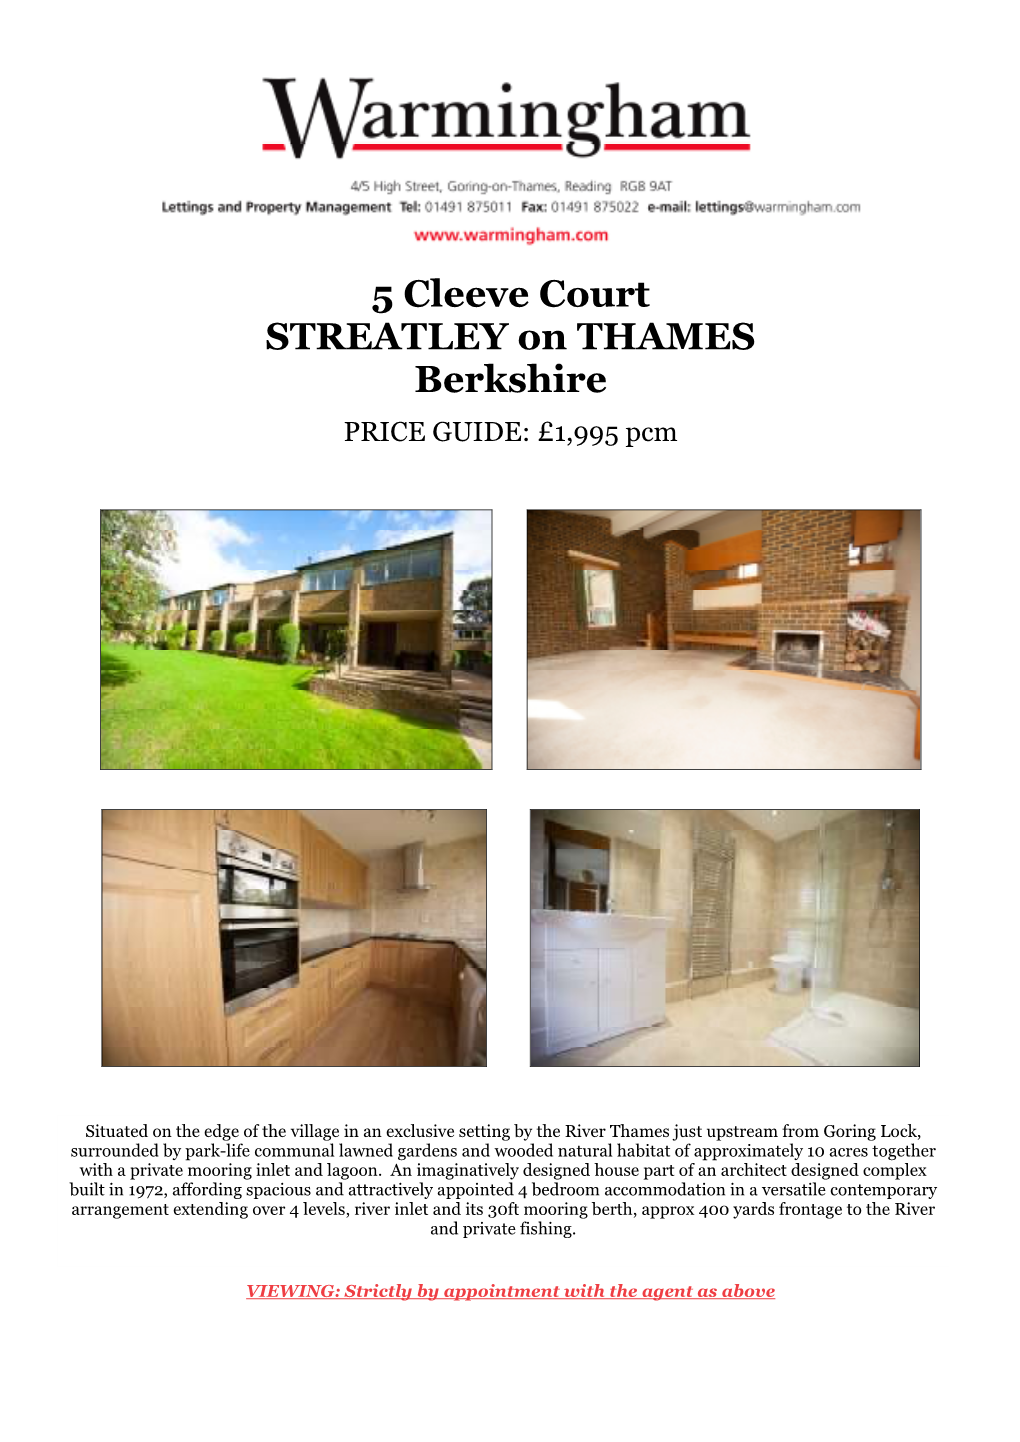 5 Cleeve Court STREATLEY on THAMES Berkshire